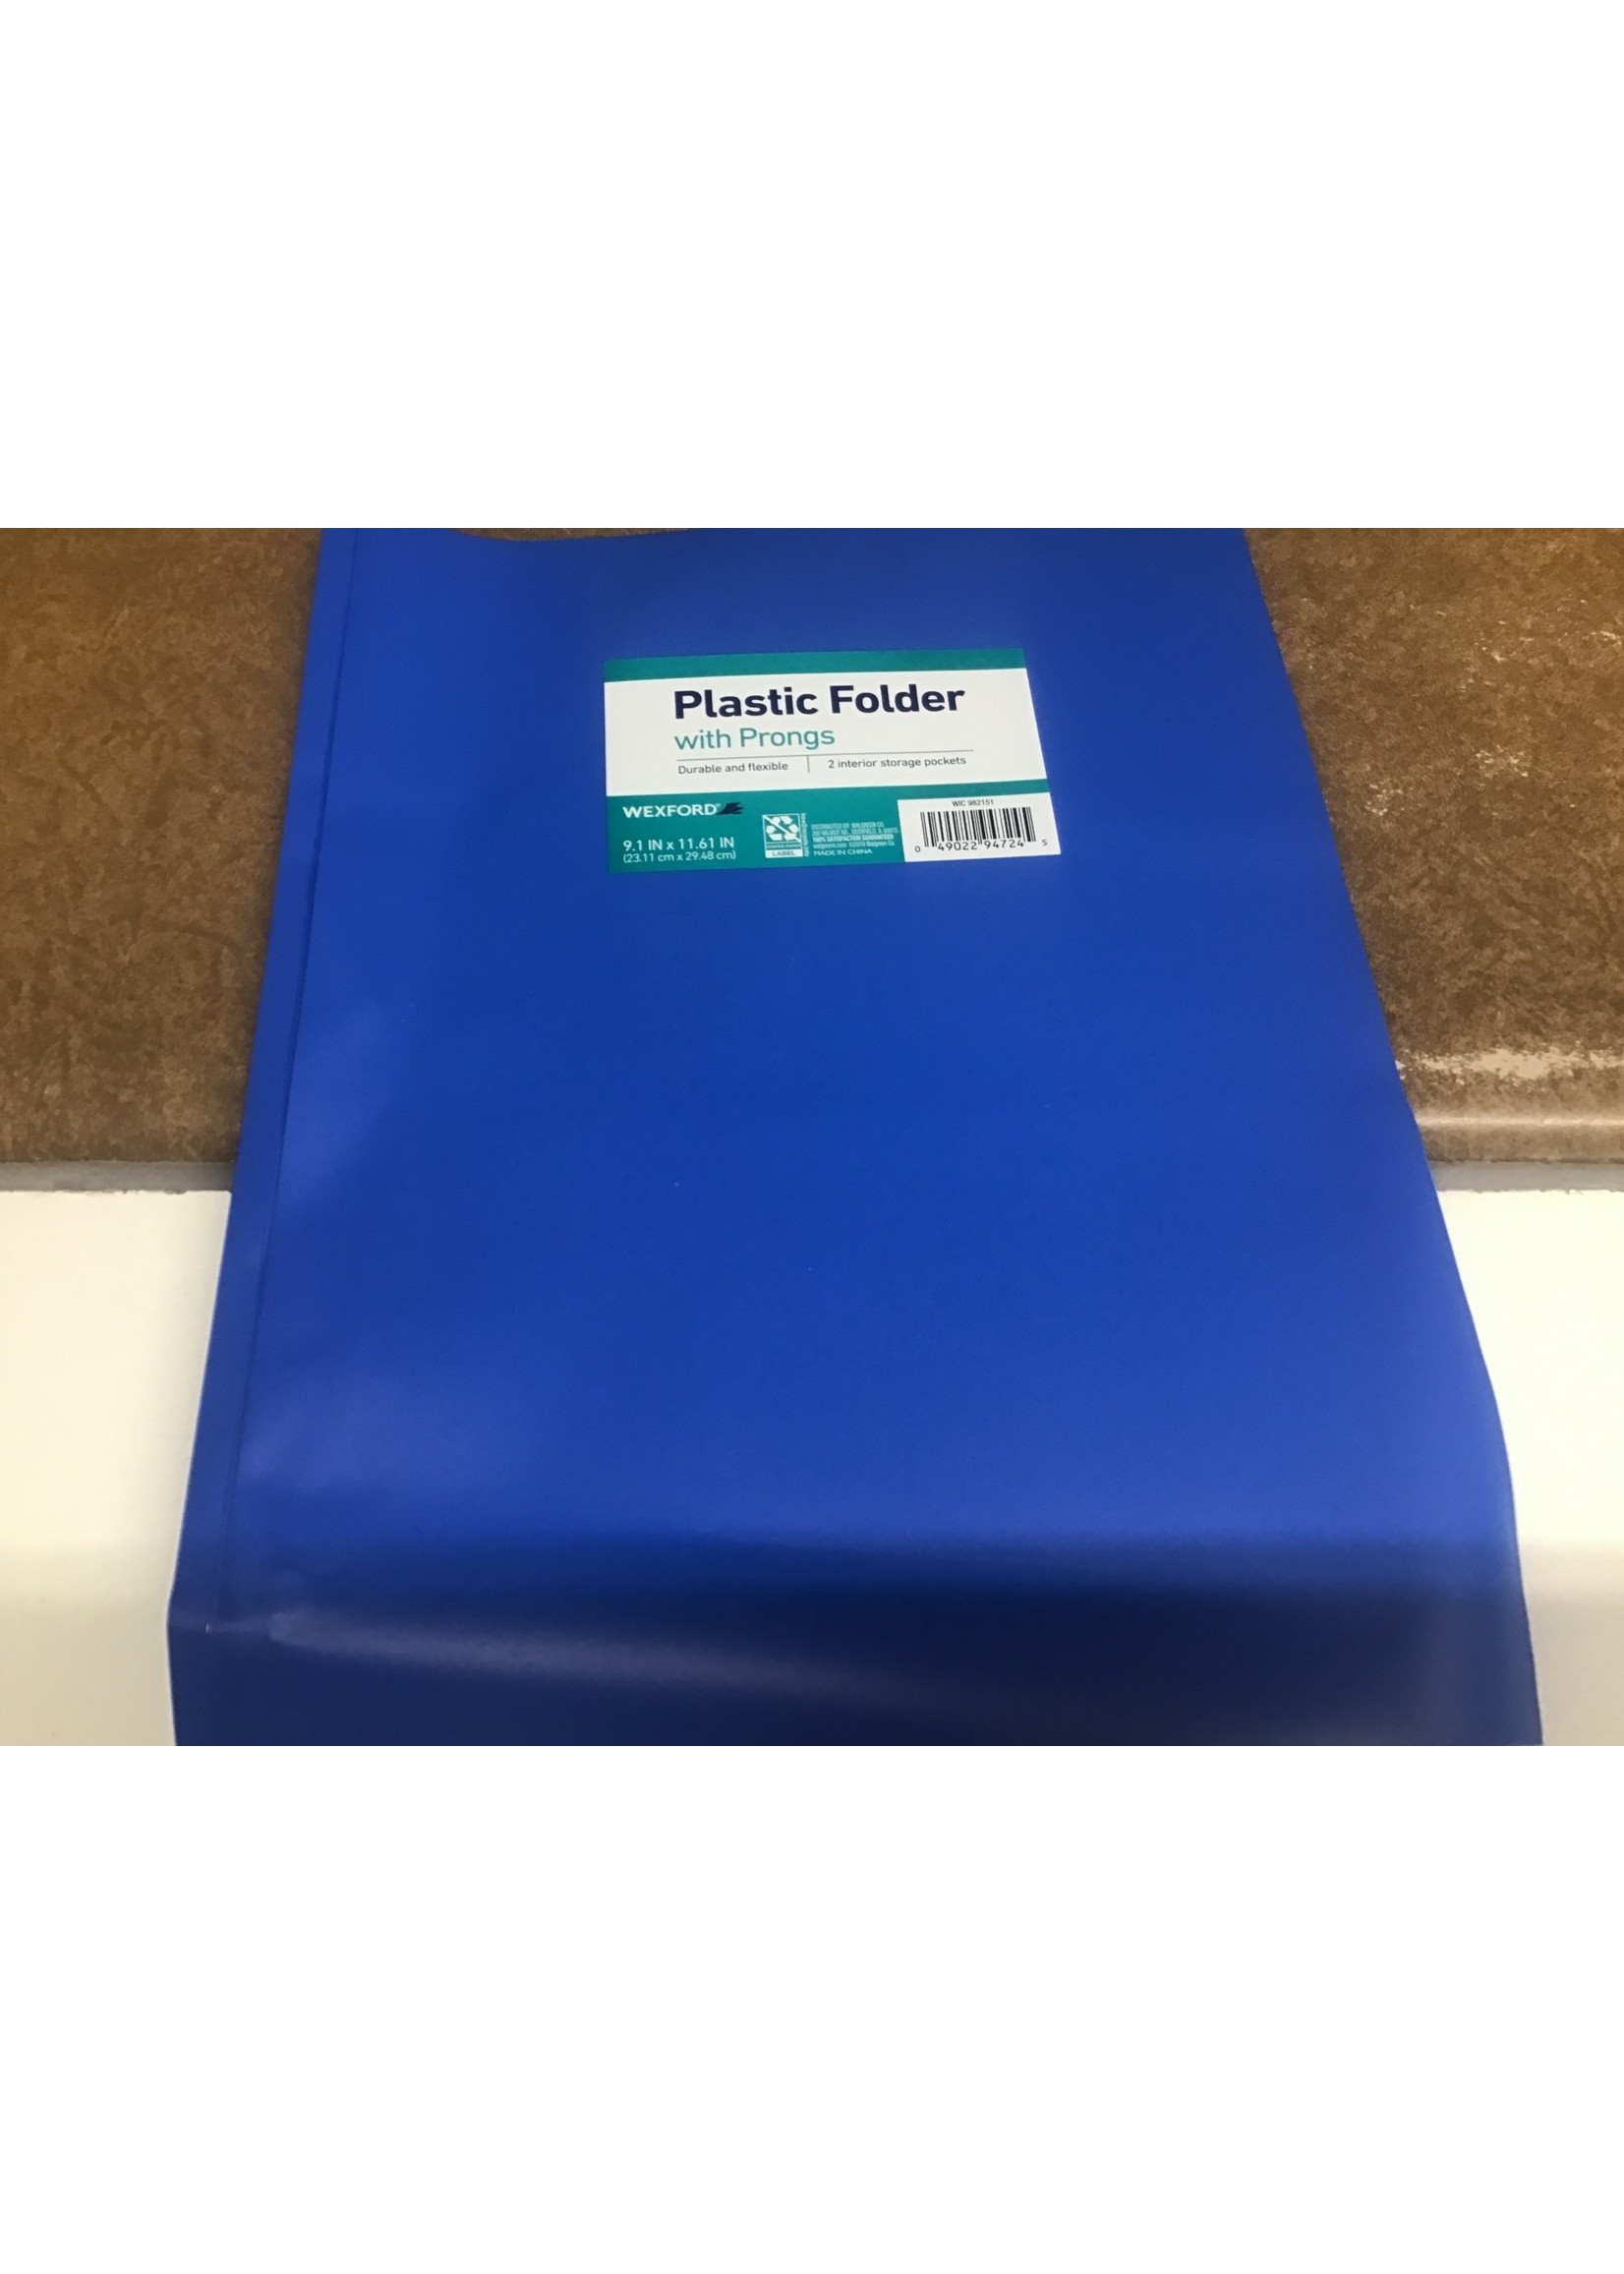 Wexford Plastic Folder with Prongs 2 interior pockets blue